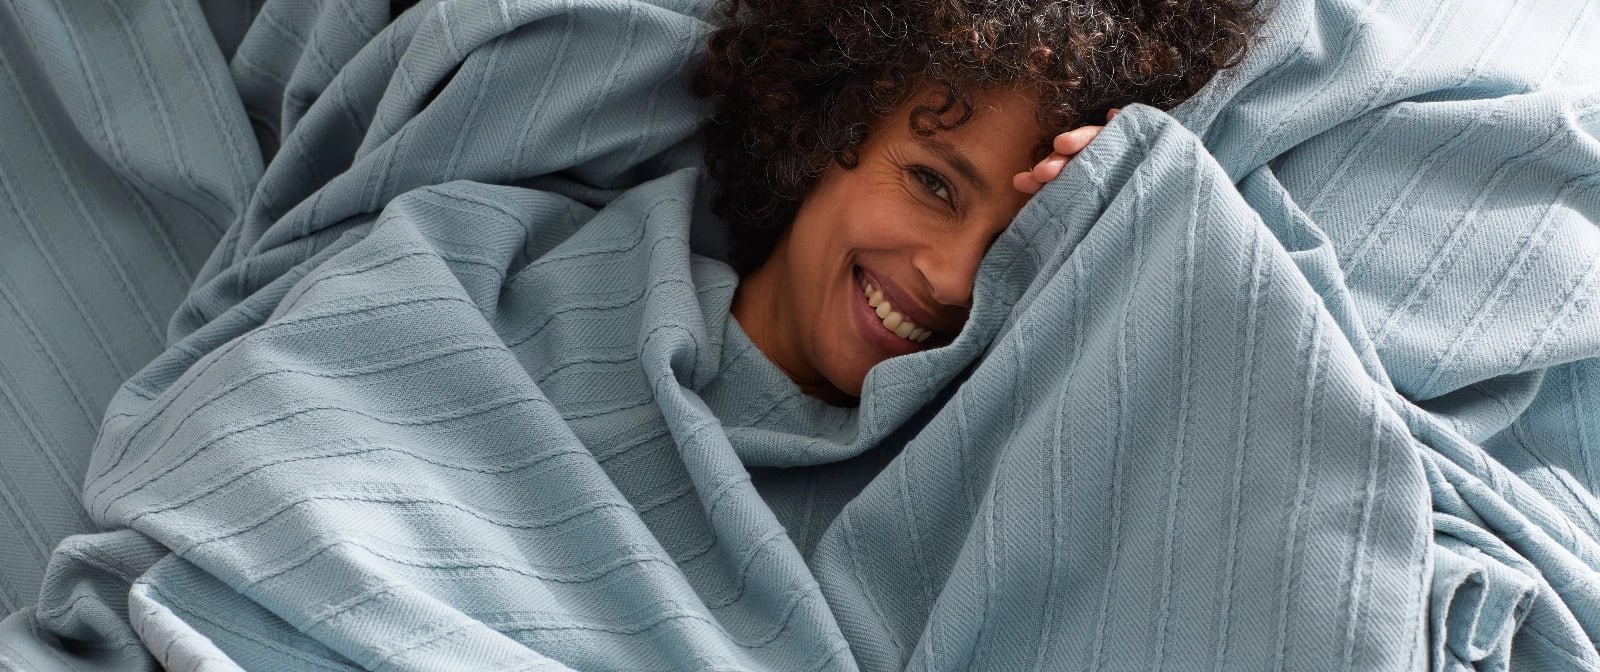 When choosing a blanket, also consider these factors